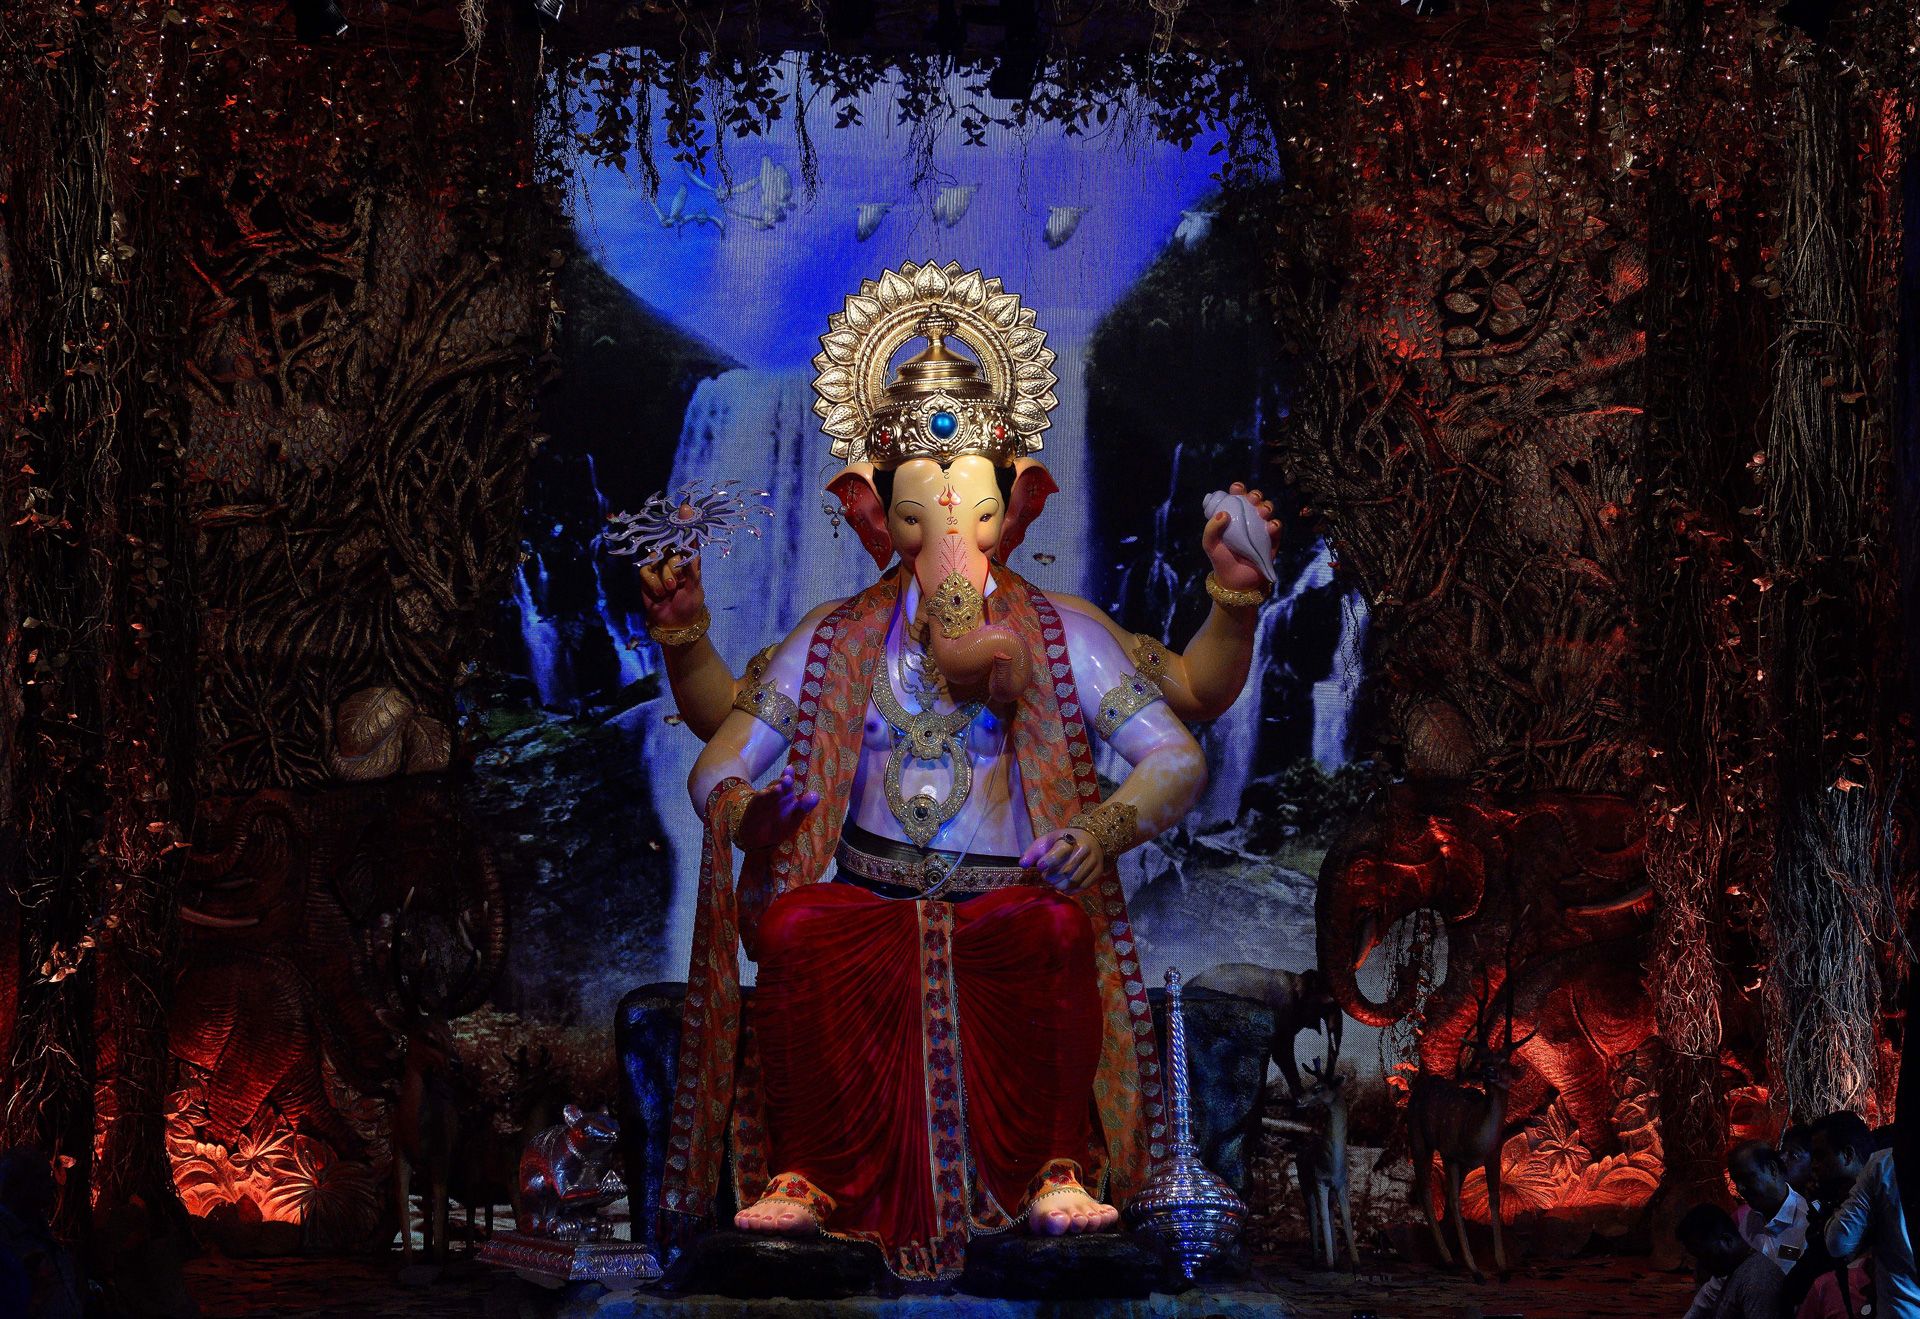 Lalbaugcha Raja 2018: Darshan timings, photo, queues and everything else you need to get blessed. Condé Nast Traveller India